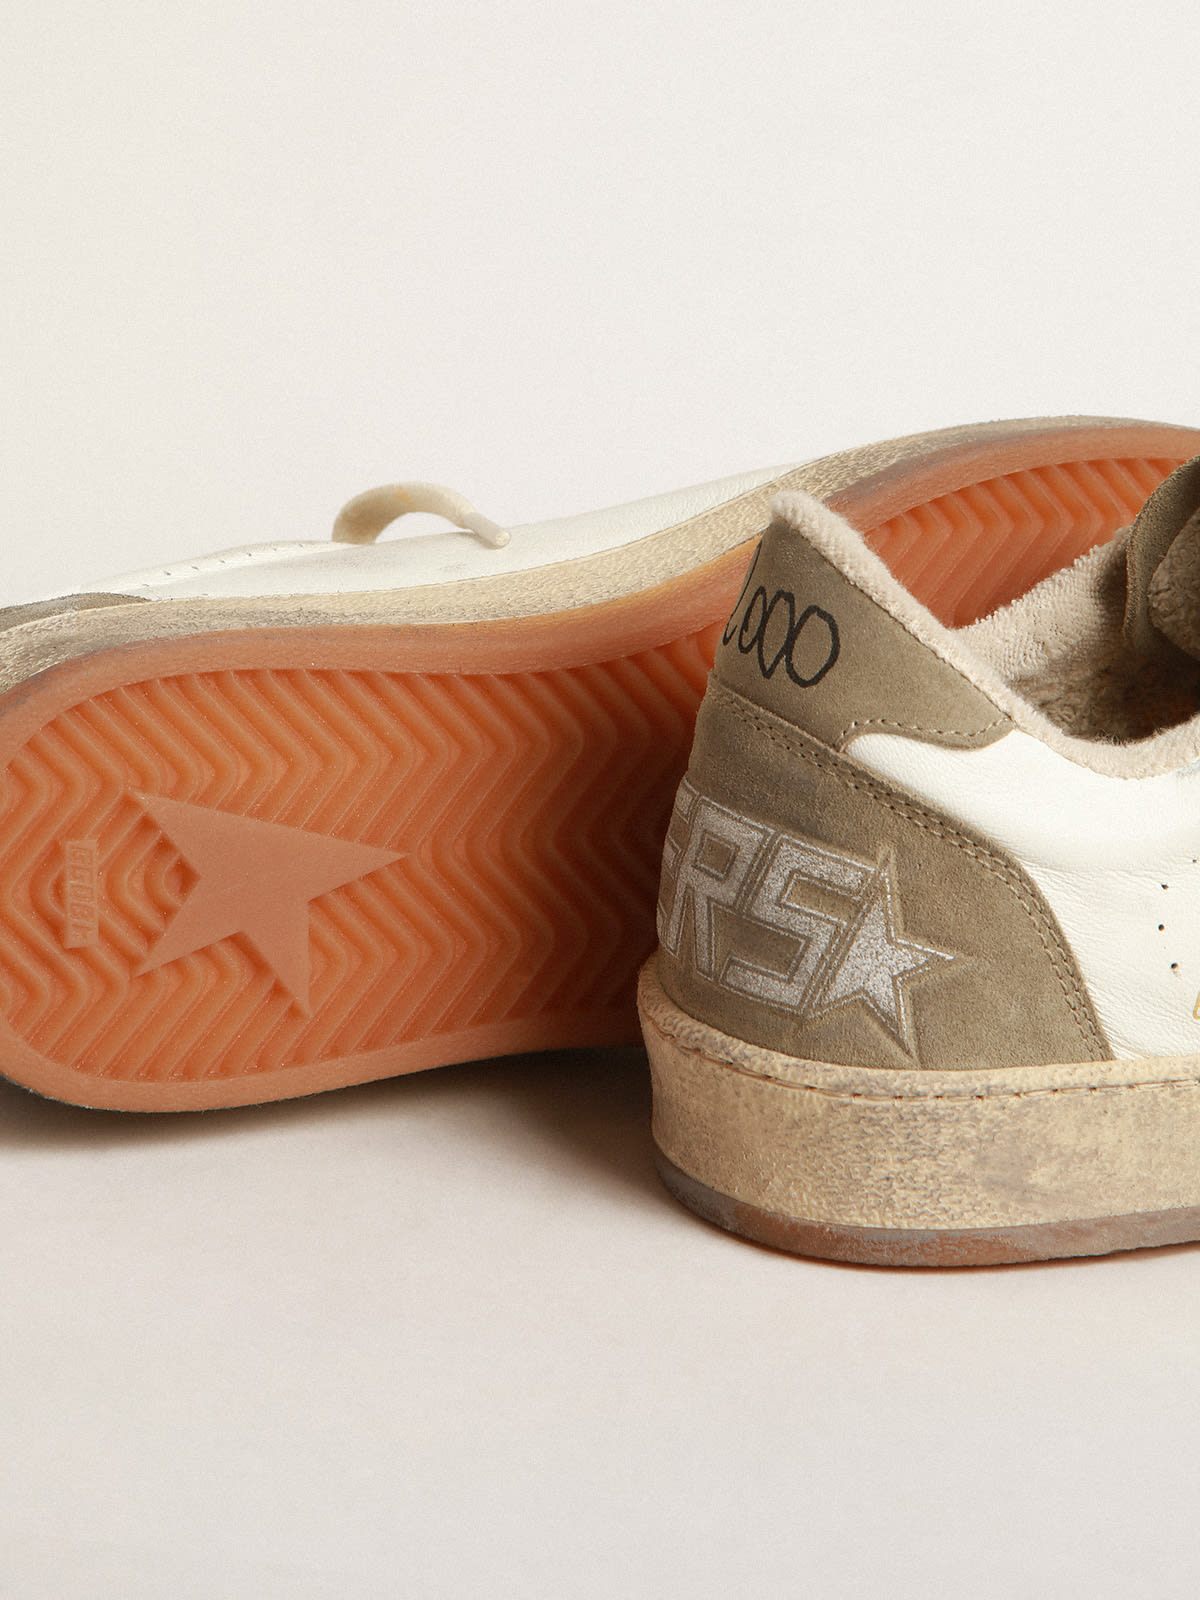 Golden Goose - Men’s Ball Star with dove-gray suede star and heel tab in 